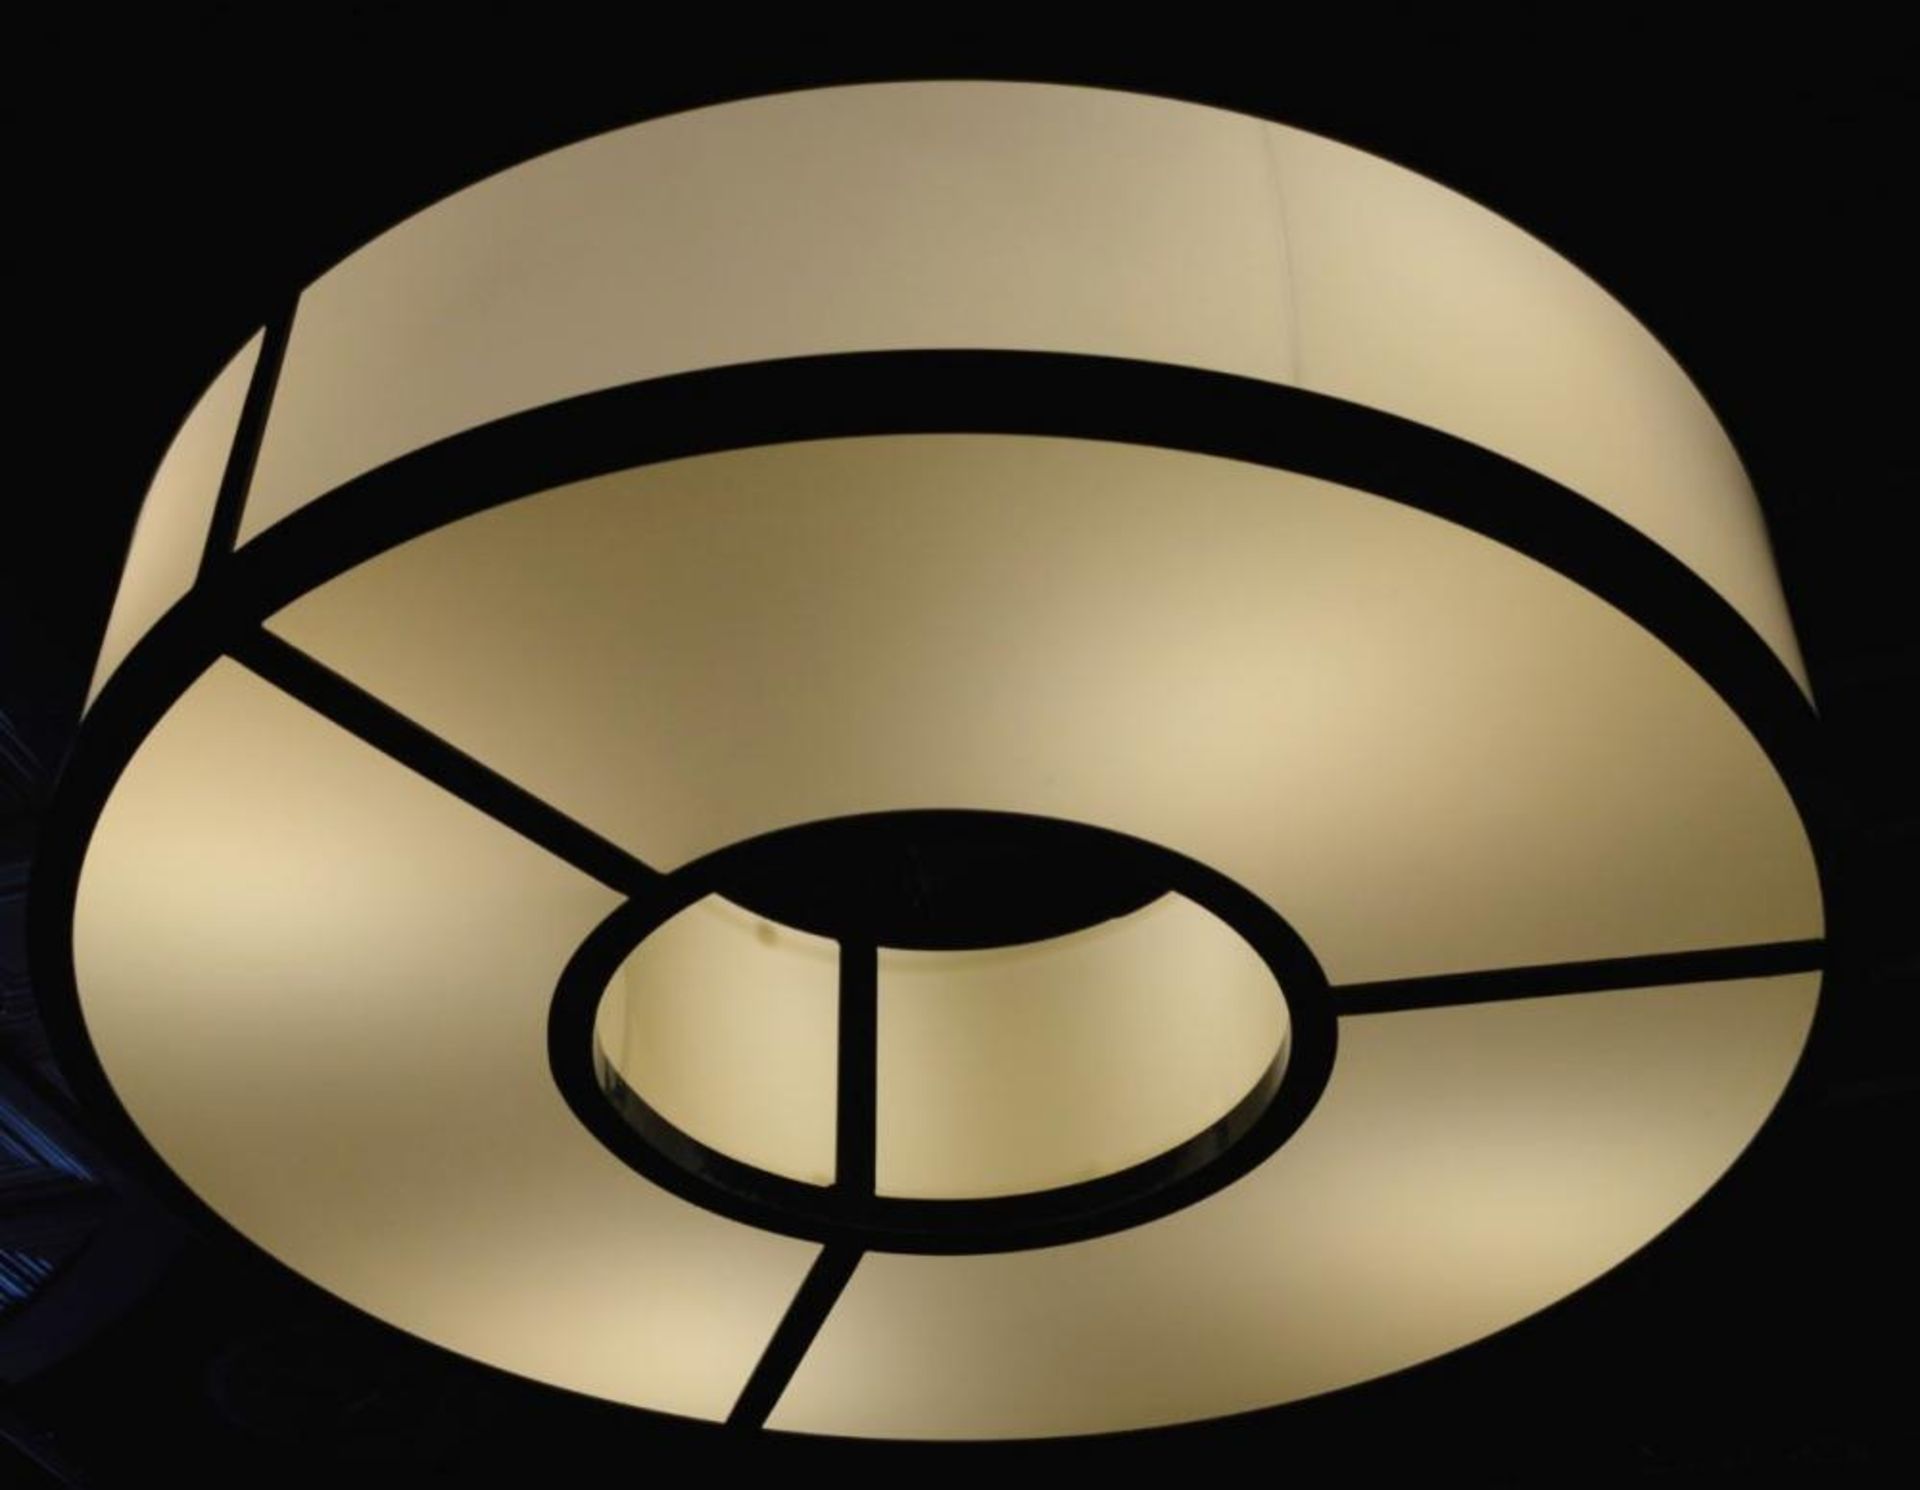 5 x Circular Feature Ceiling Lights With Suspending Chains - Opaque Style With Black Detail - Approx - Image 2 of 3